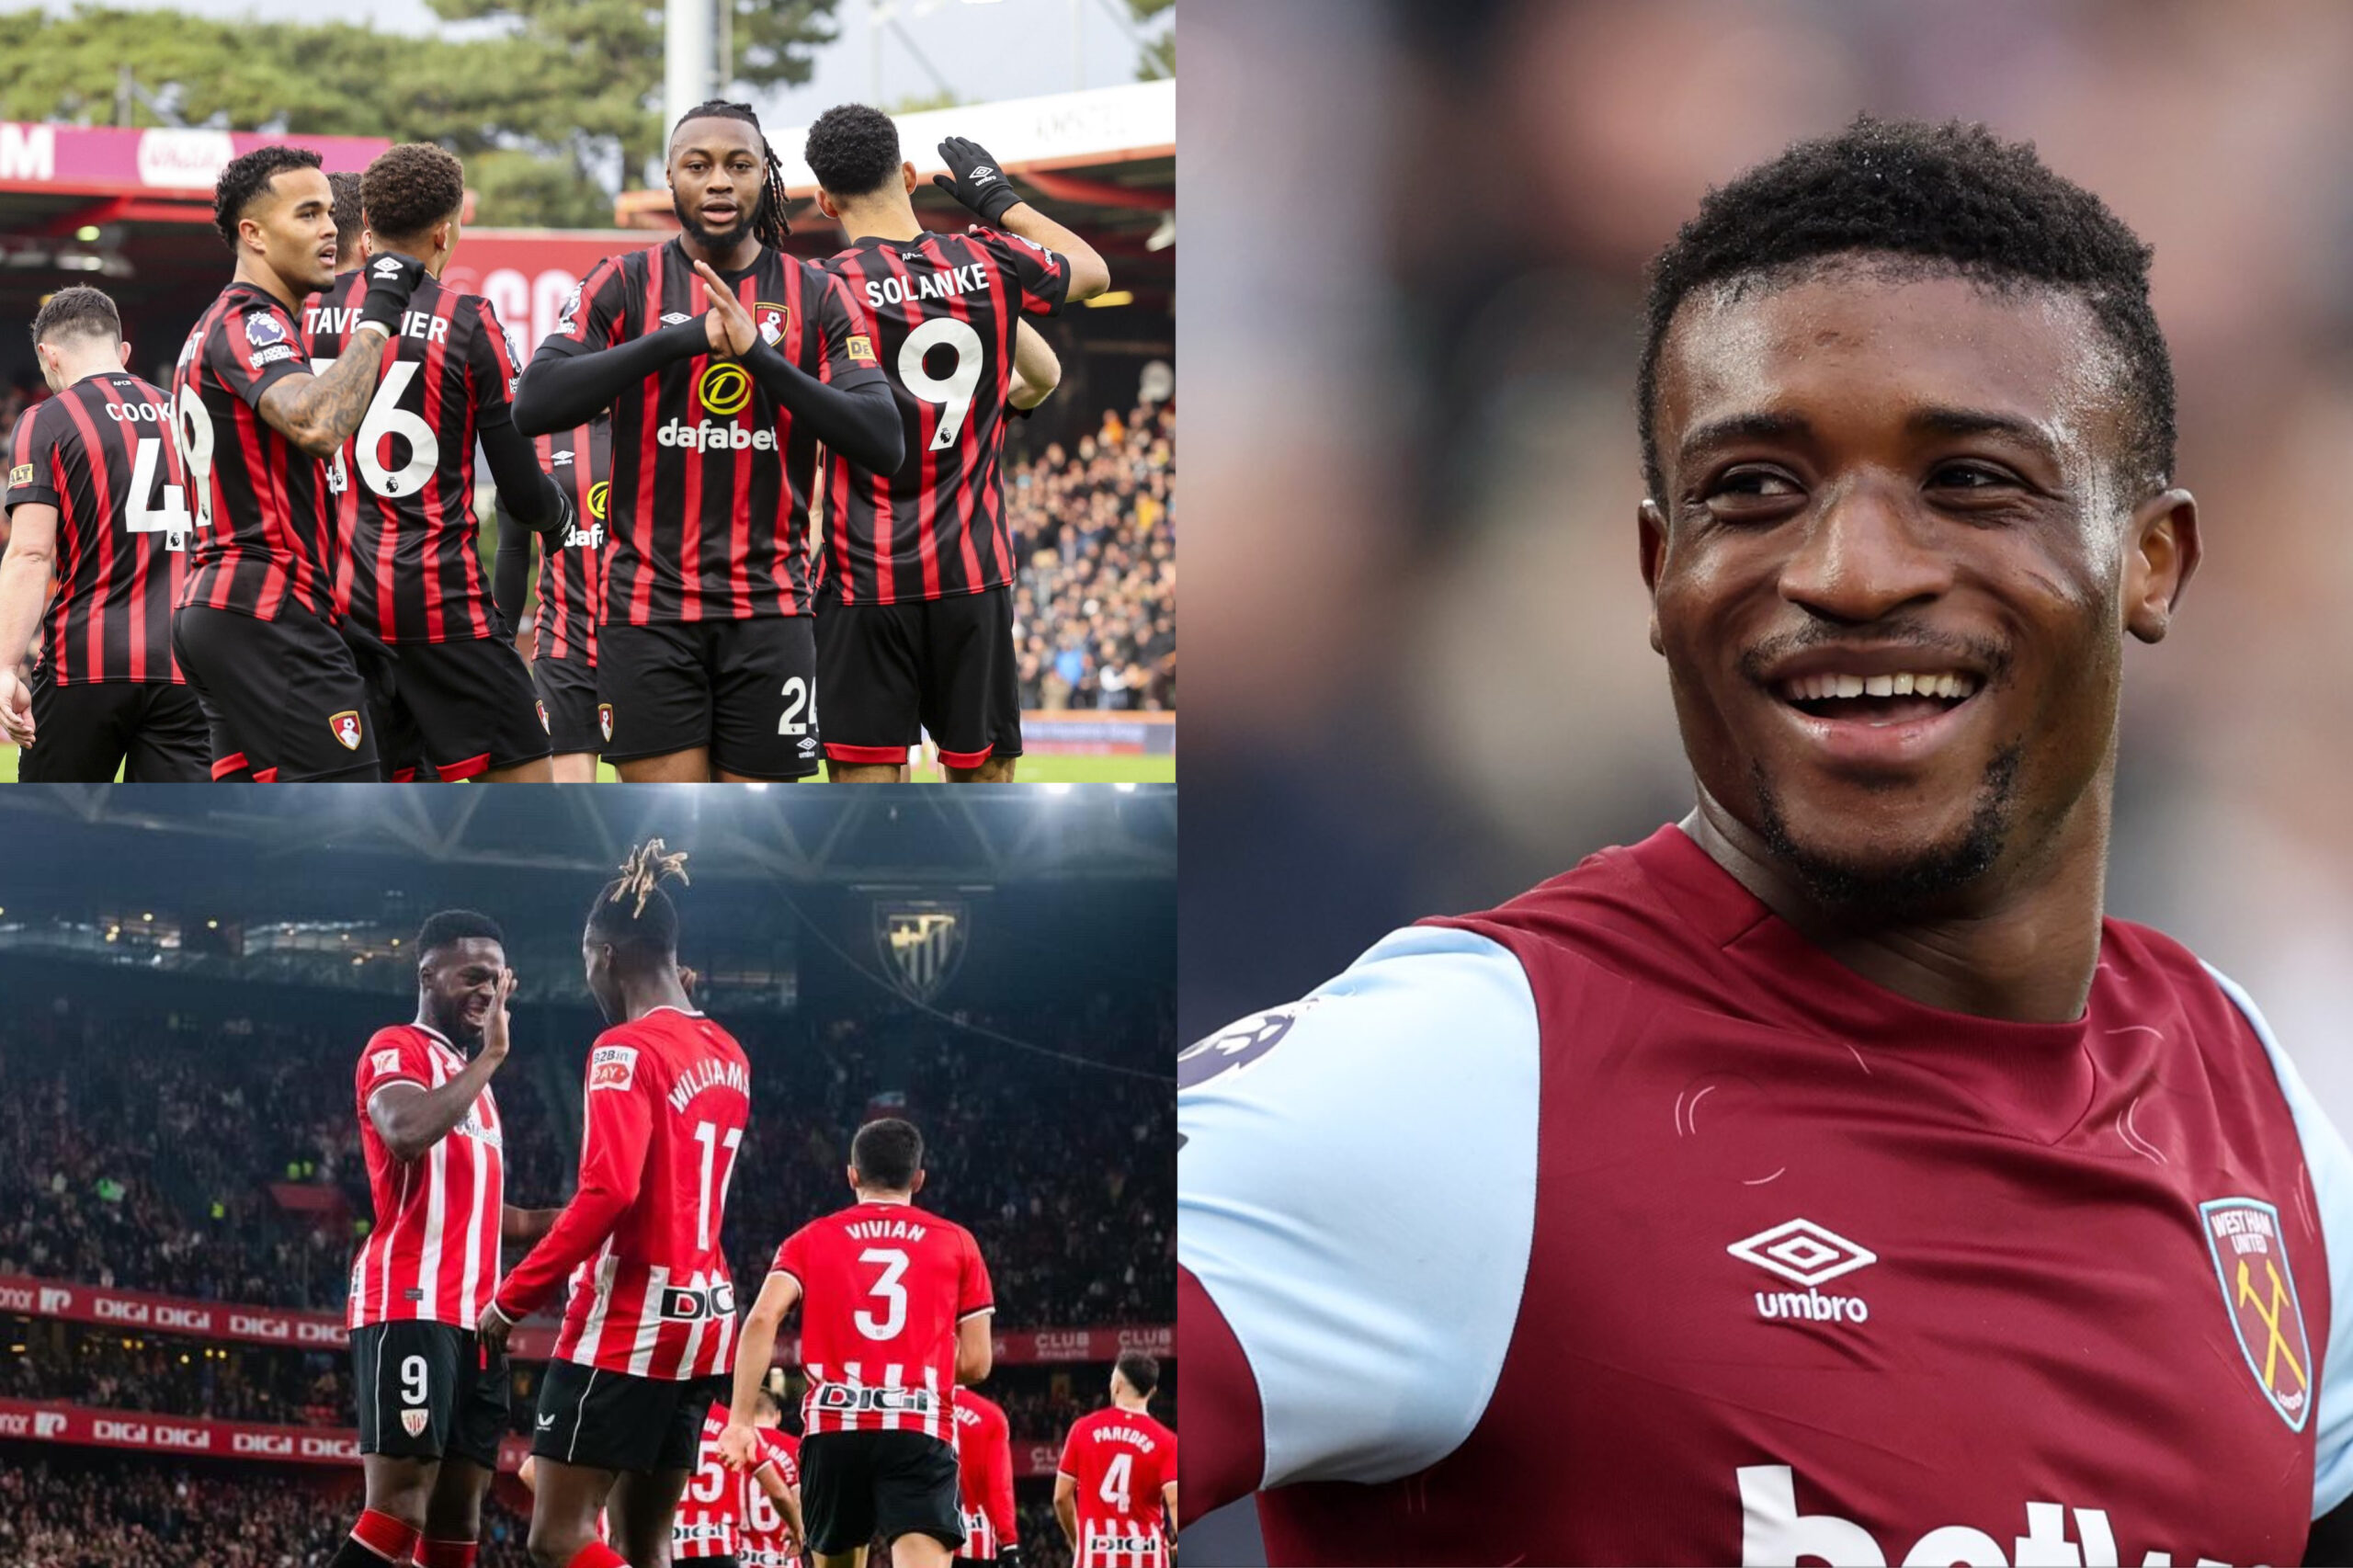 Ghanaian players abroad: Mohammed Kudus, Antoine Semenyo and Inaki Williams score in exciting weekend for Black Stars